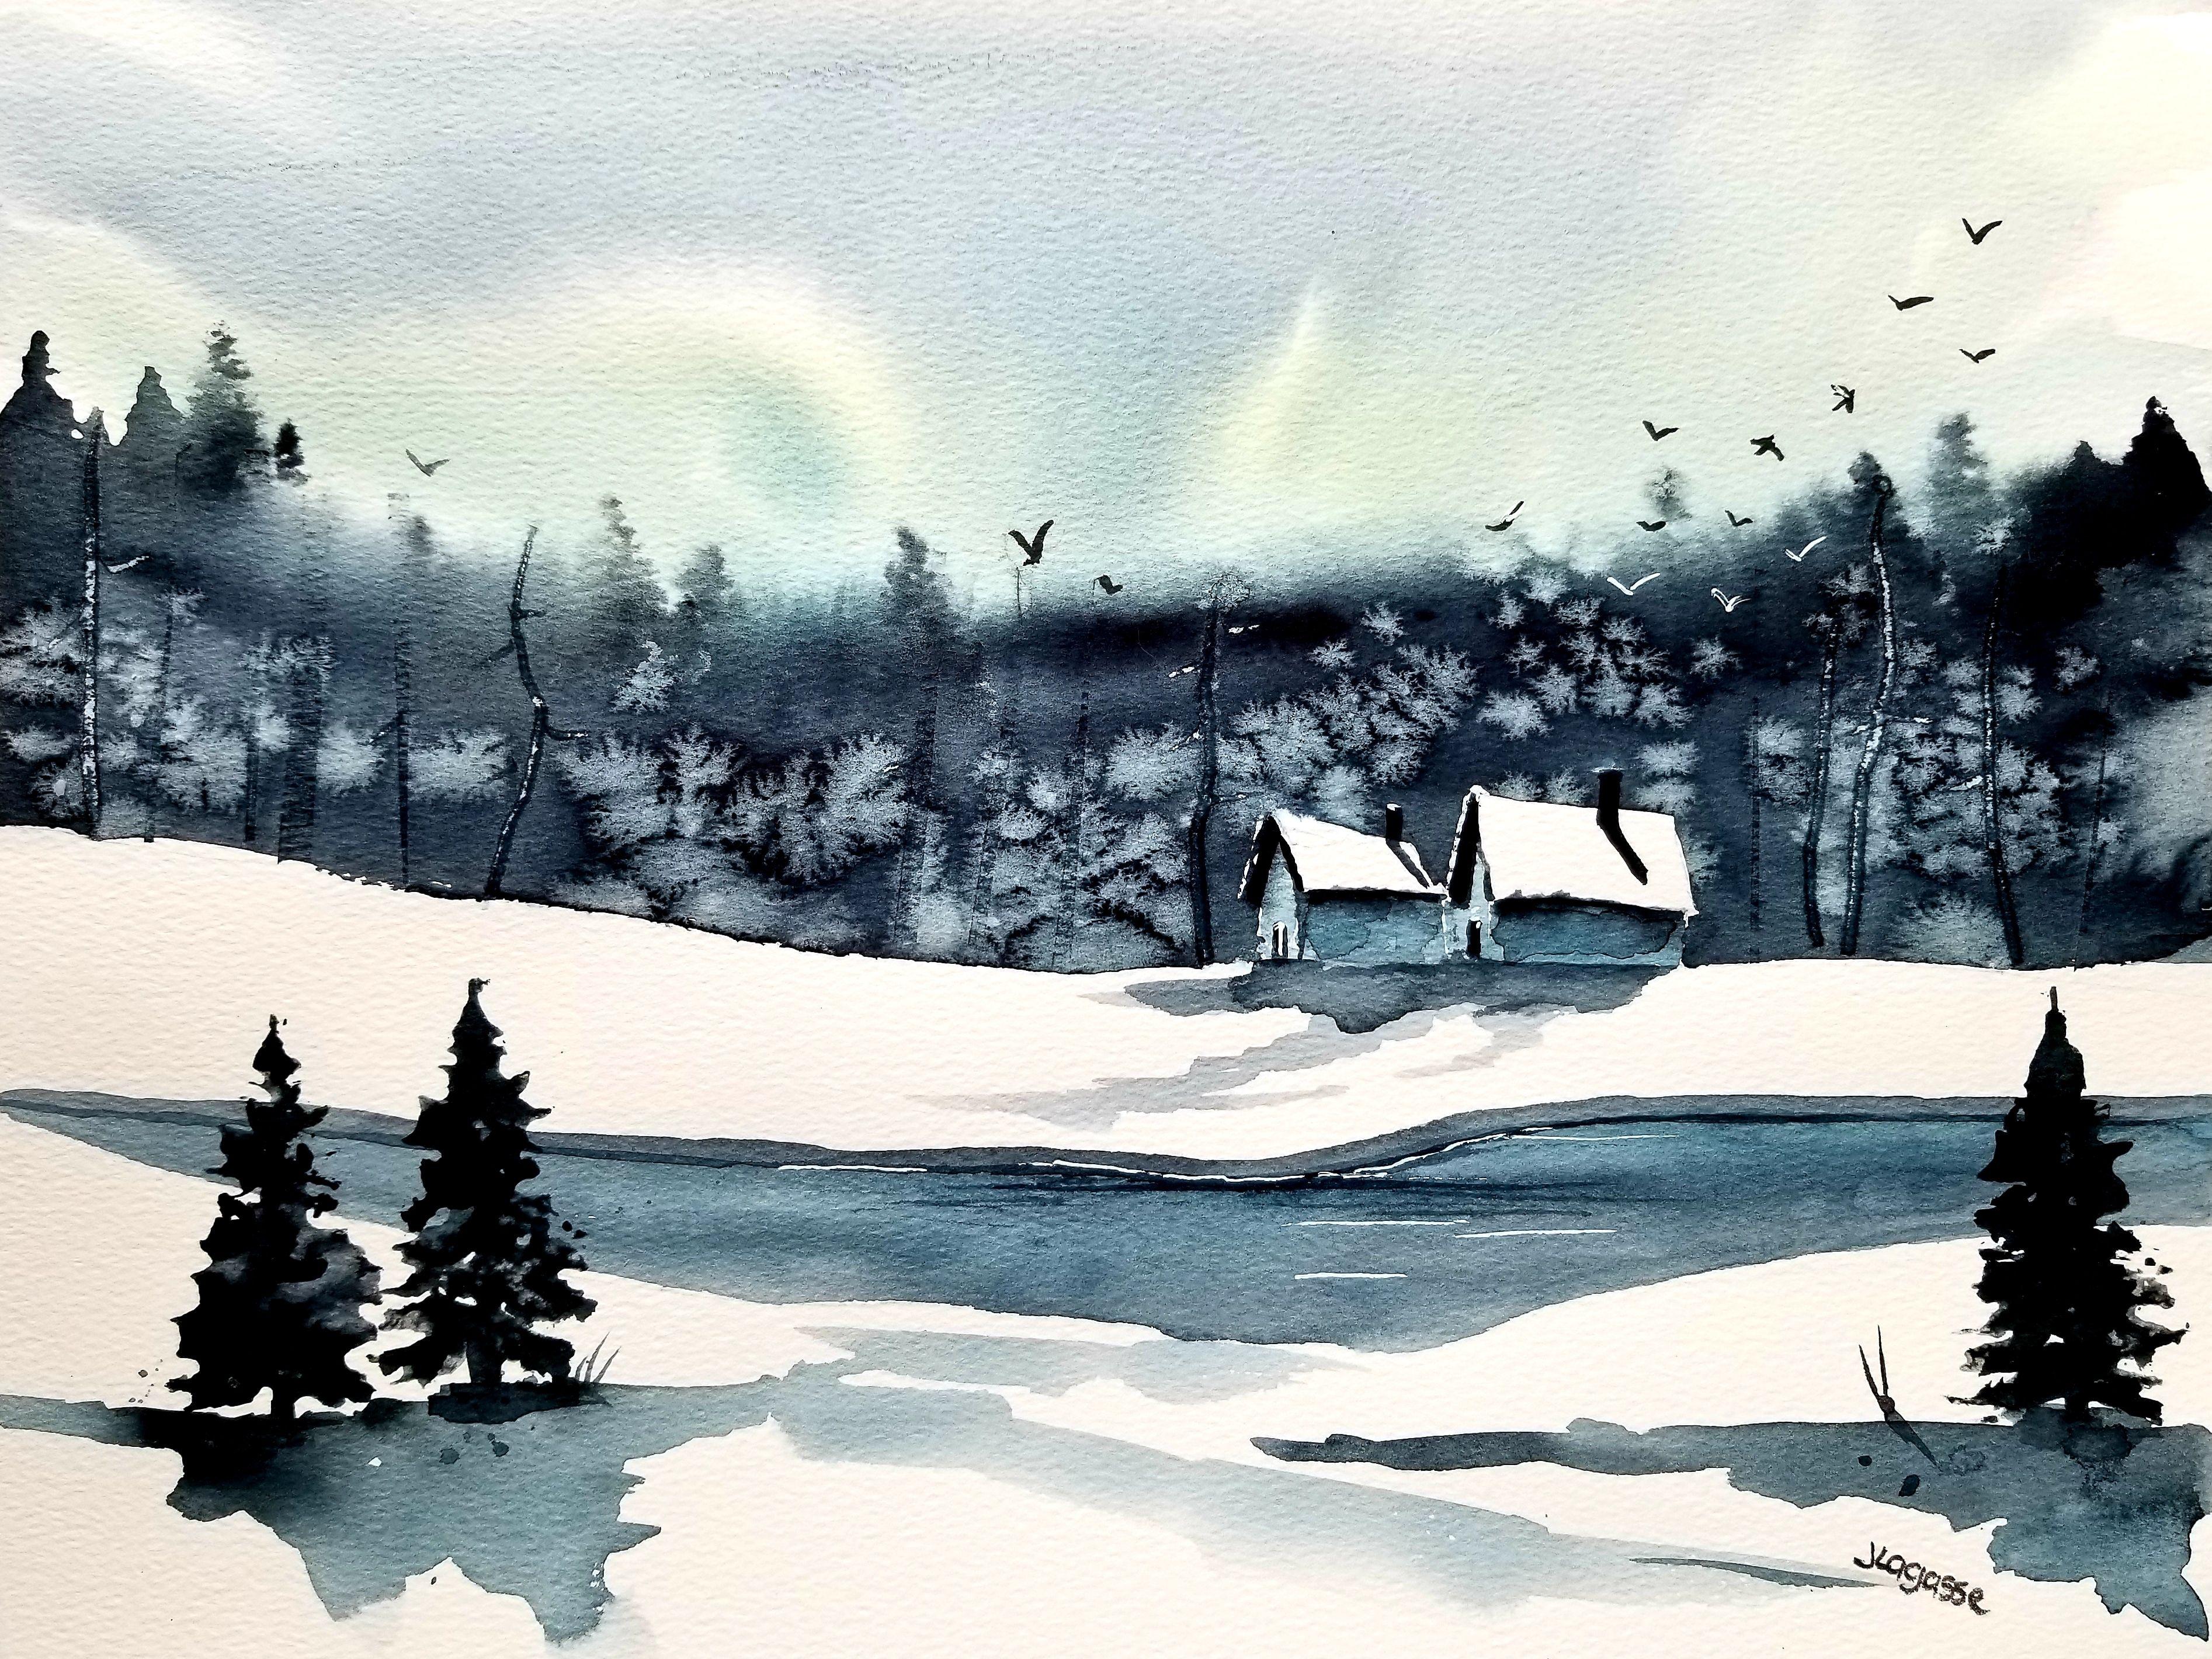 Blue Winter, Painting, Watercolor on Watercolor Paper - Art by Jim Lagasse